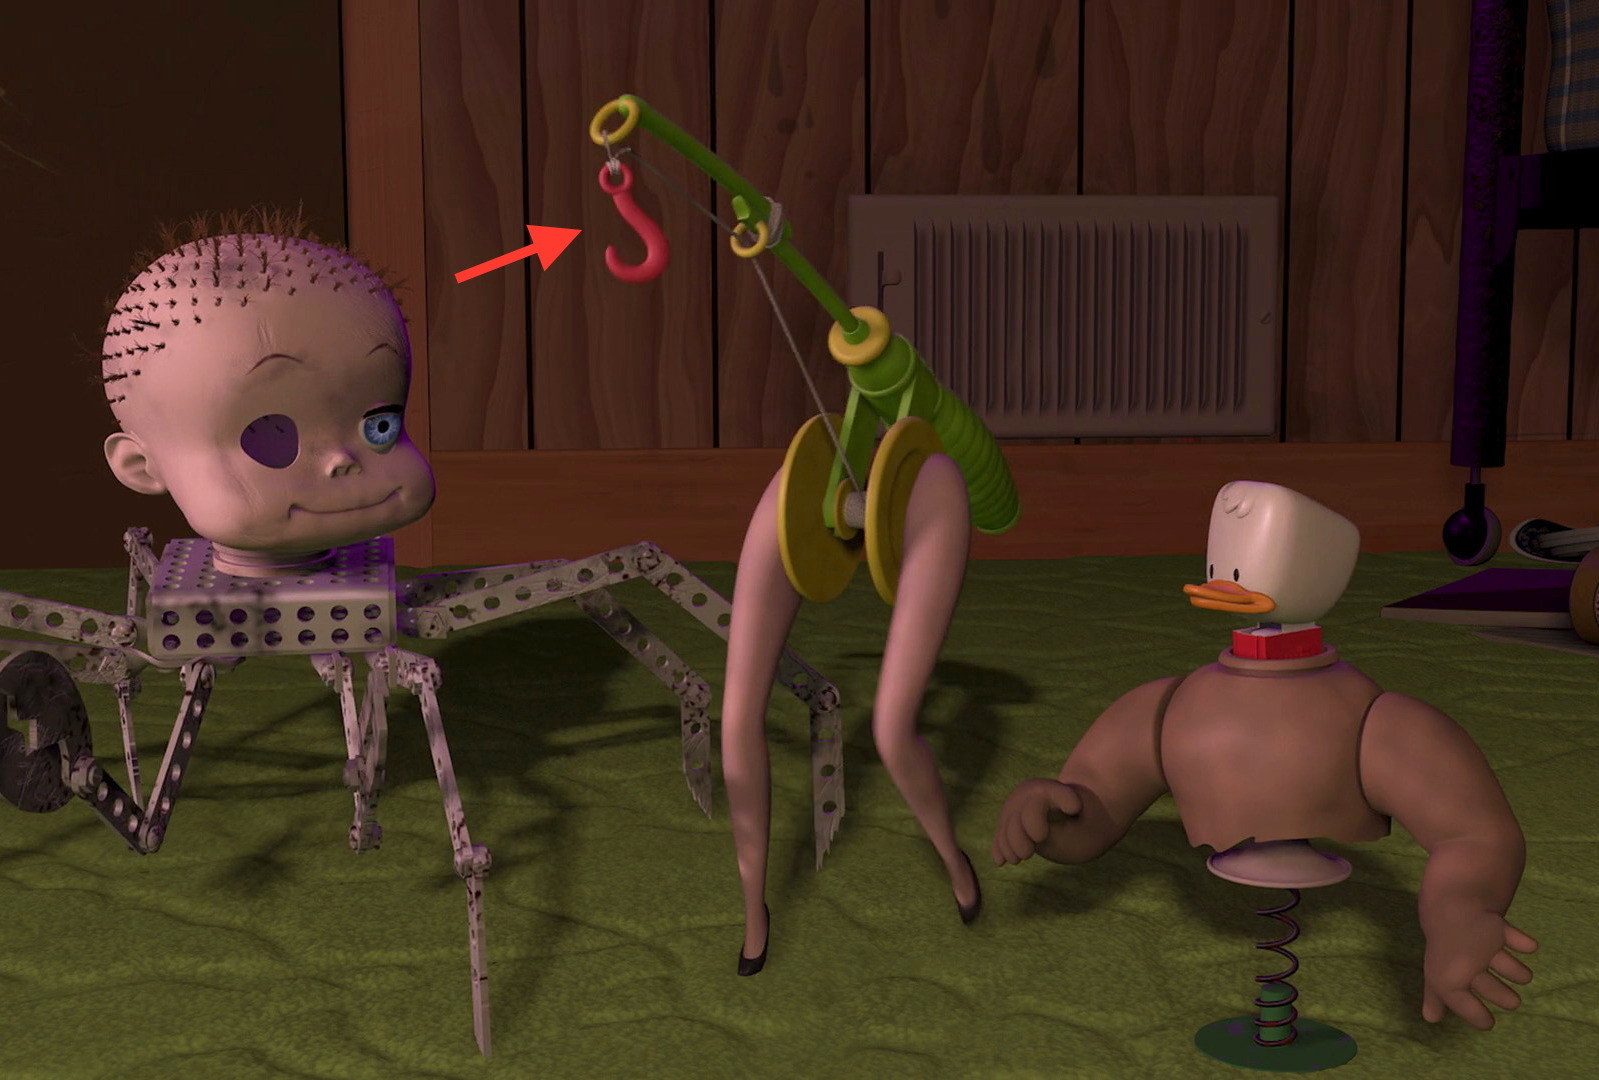 The literal "hooker" in Toy Story. 